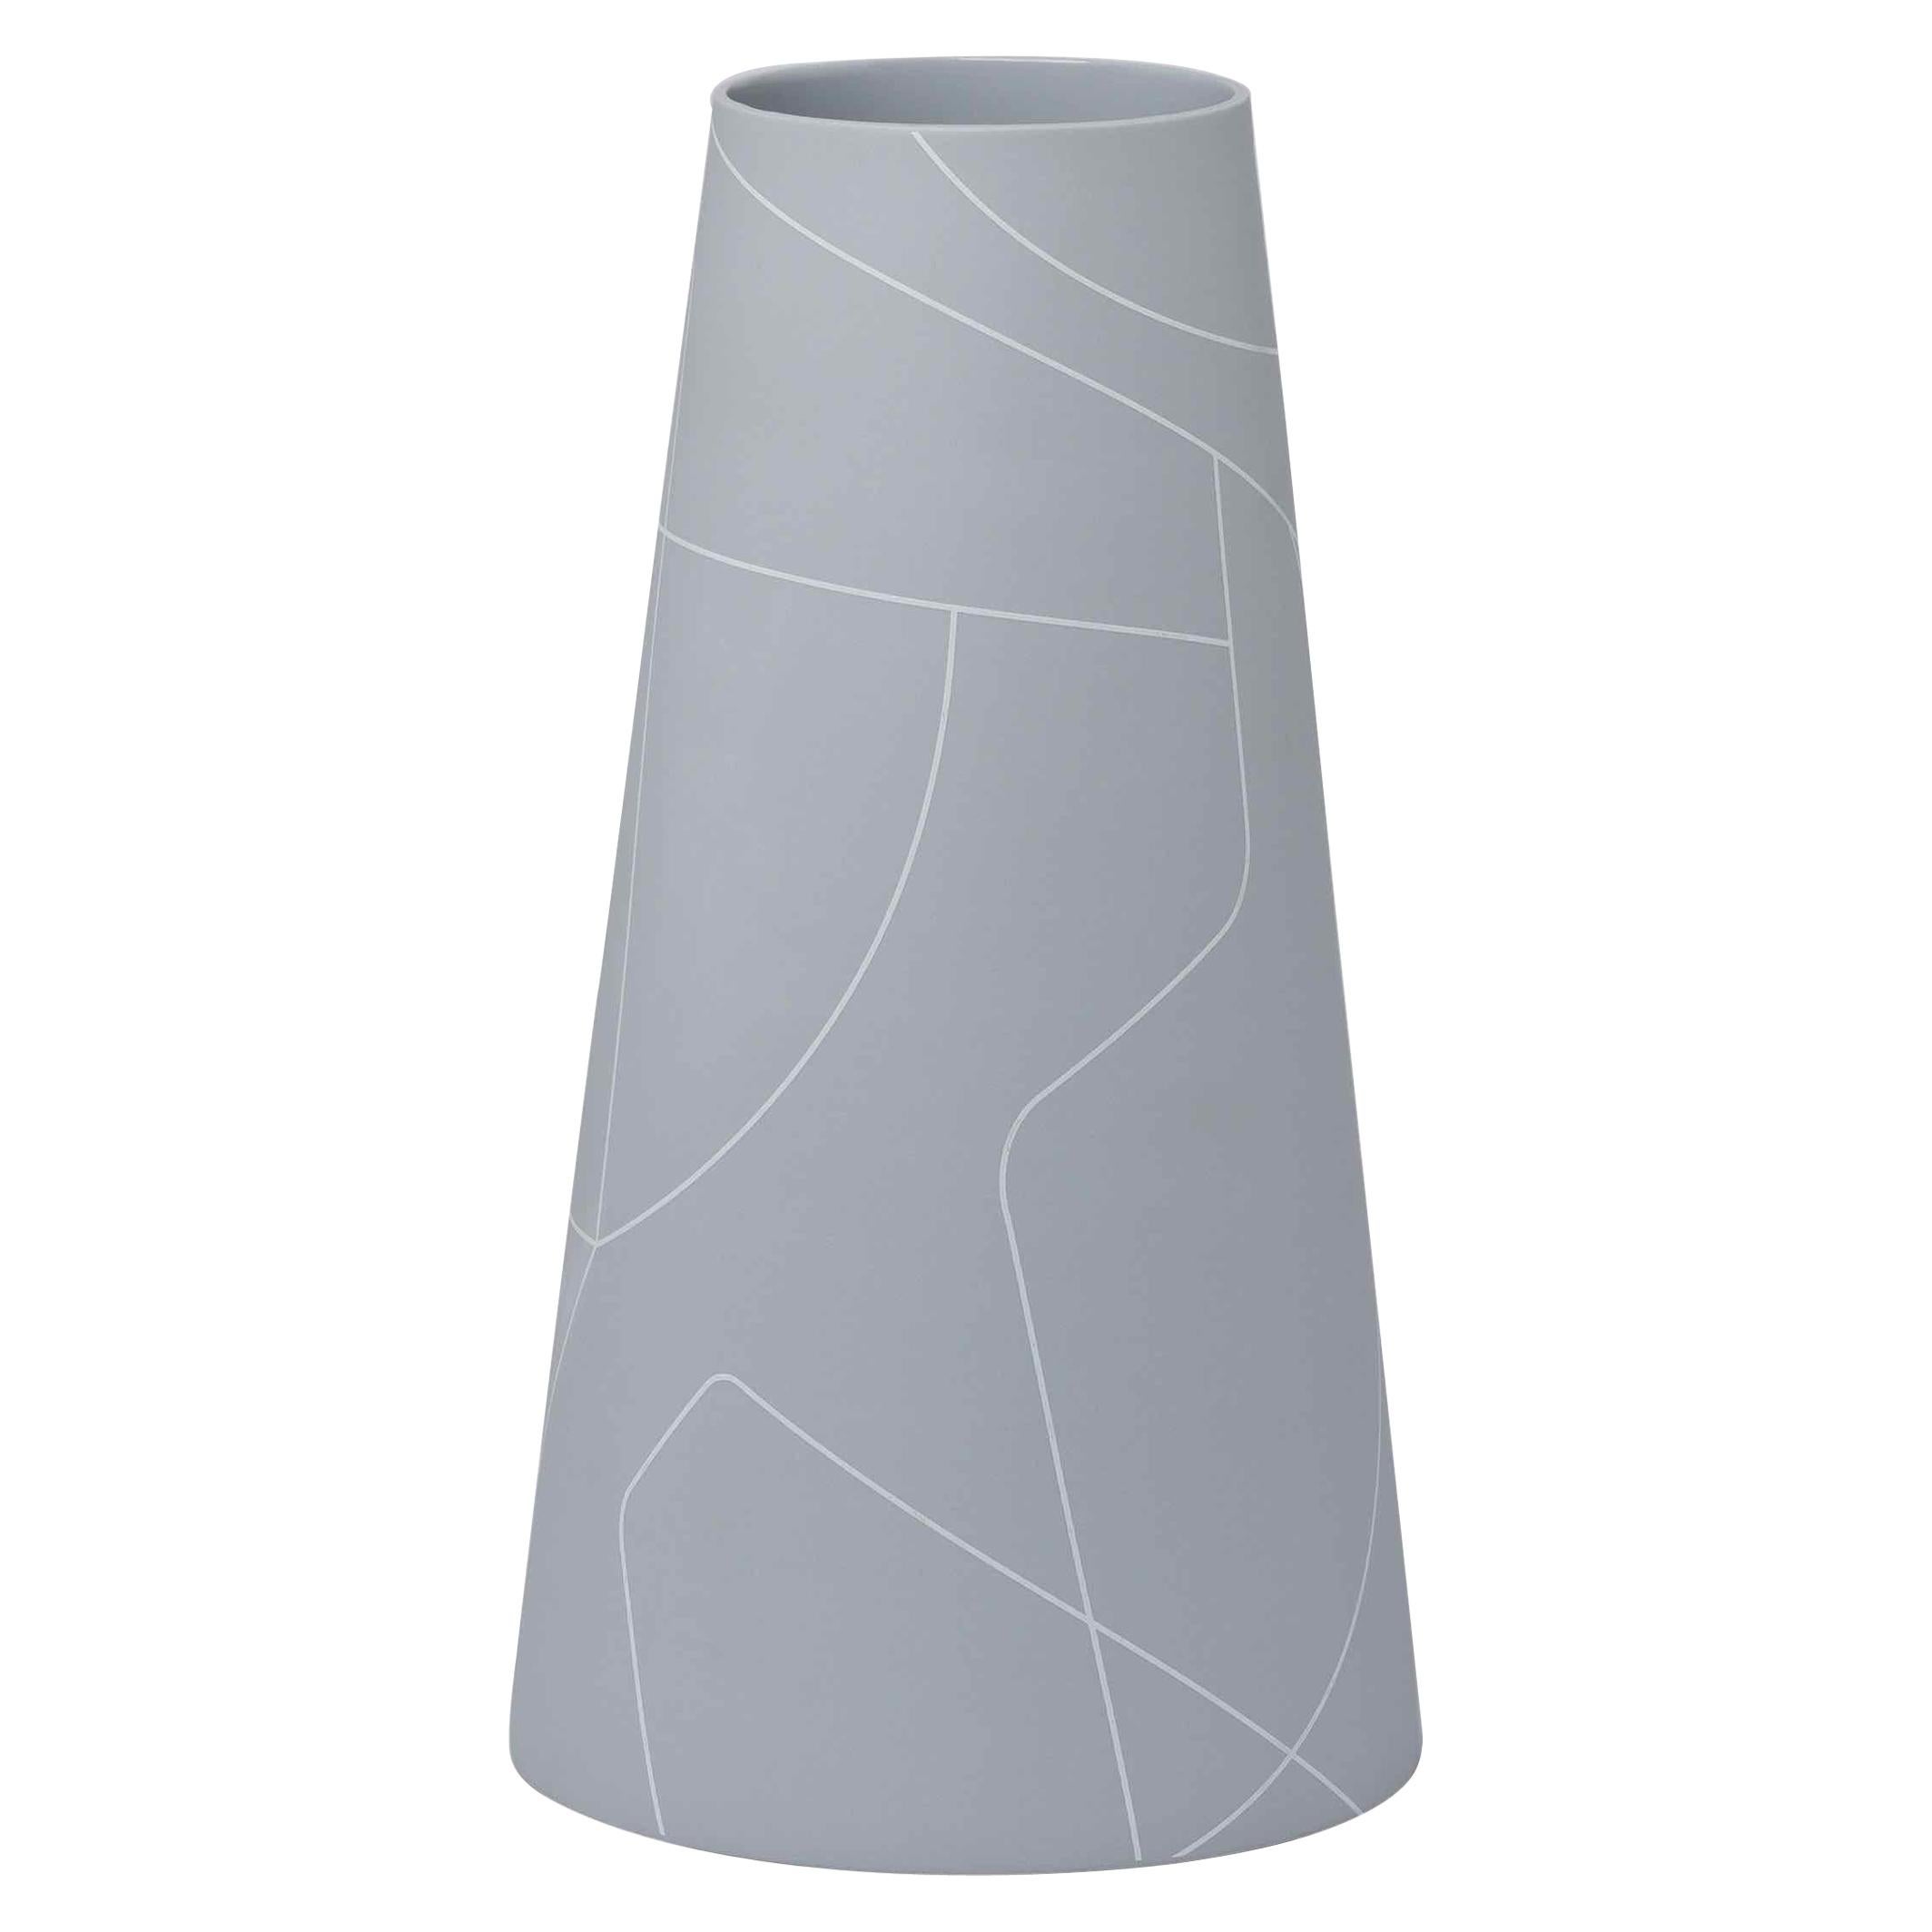 Tall Thin Medium Grey Conical Ceramic Vase with Graphic Line Pattern